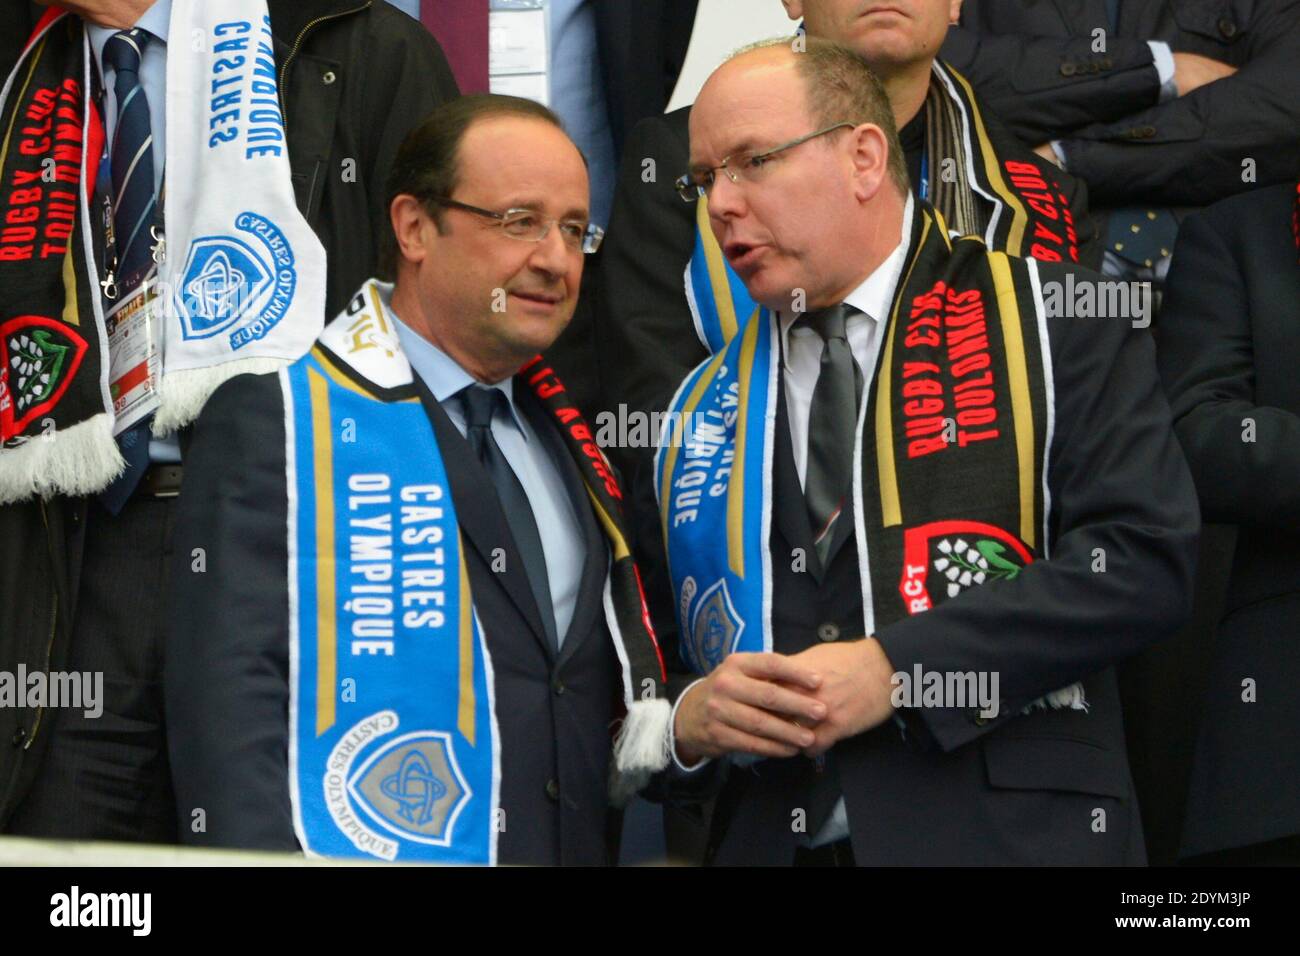 Prince Albert de Monaco and Francois Hollande during the Top 14 Final Rugby  match Castres vs Toulon at the Stade de France in Saint-Denis, France on  June 1st, 2013. Castres won 19-14.